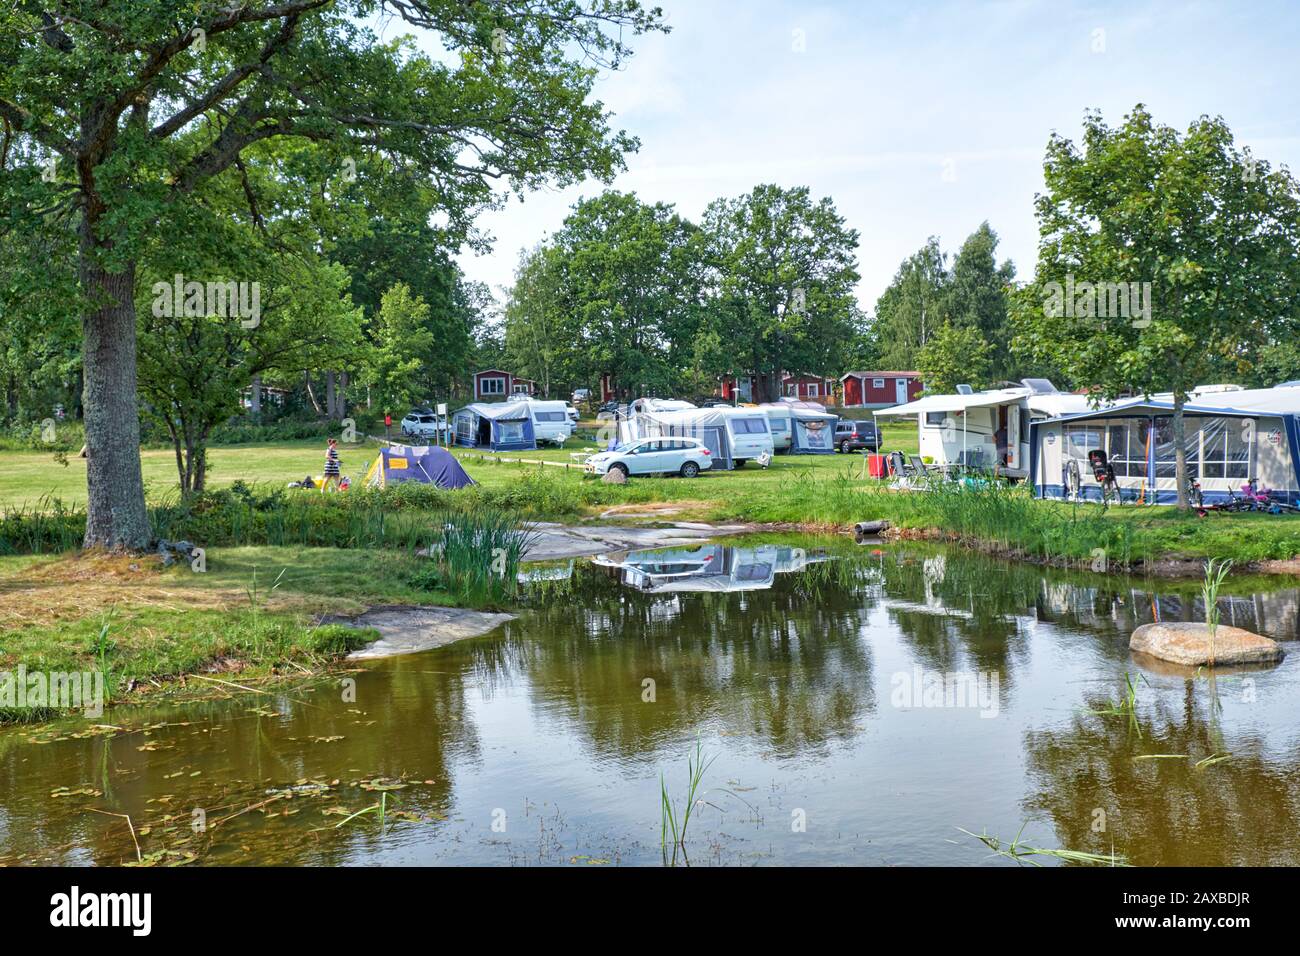 Swedish campsite with pond, caravans and holiday chalets Stock Photo